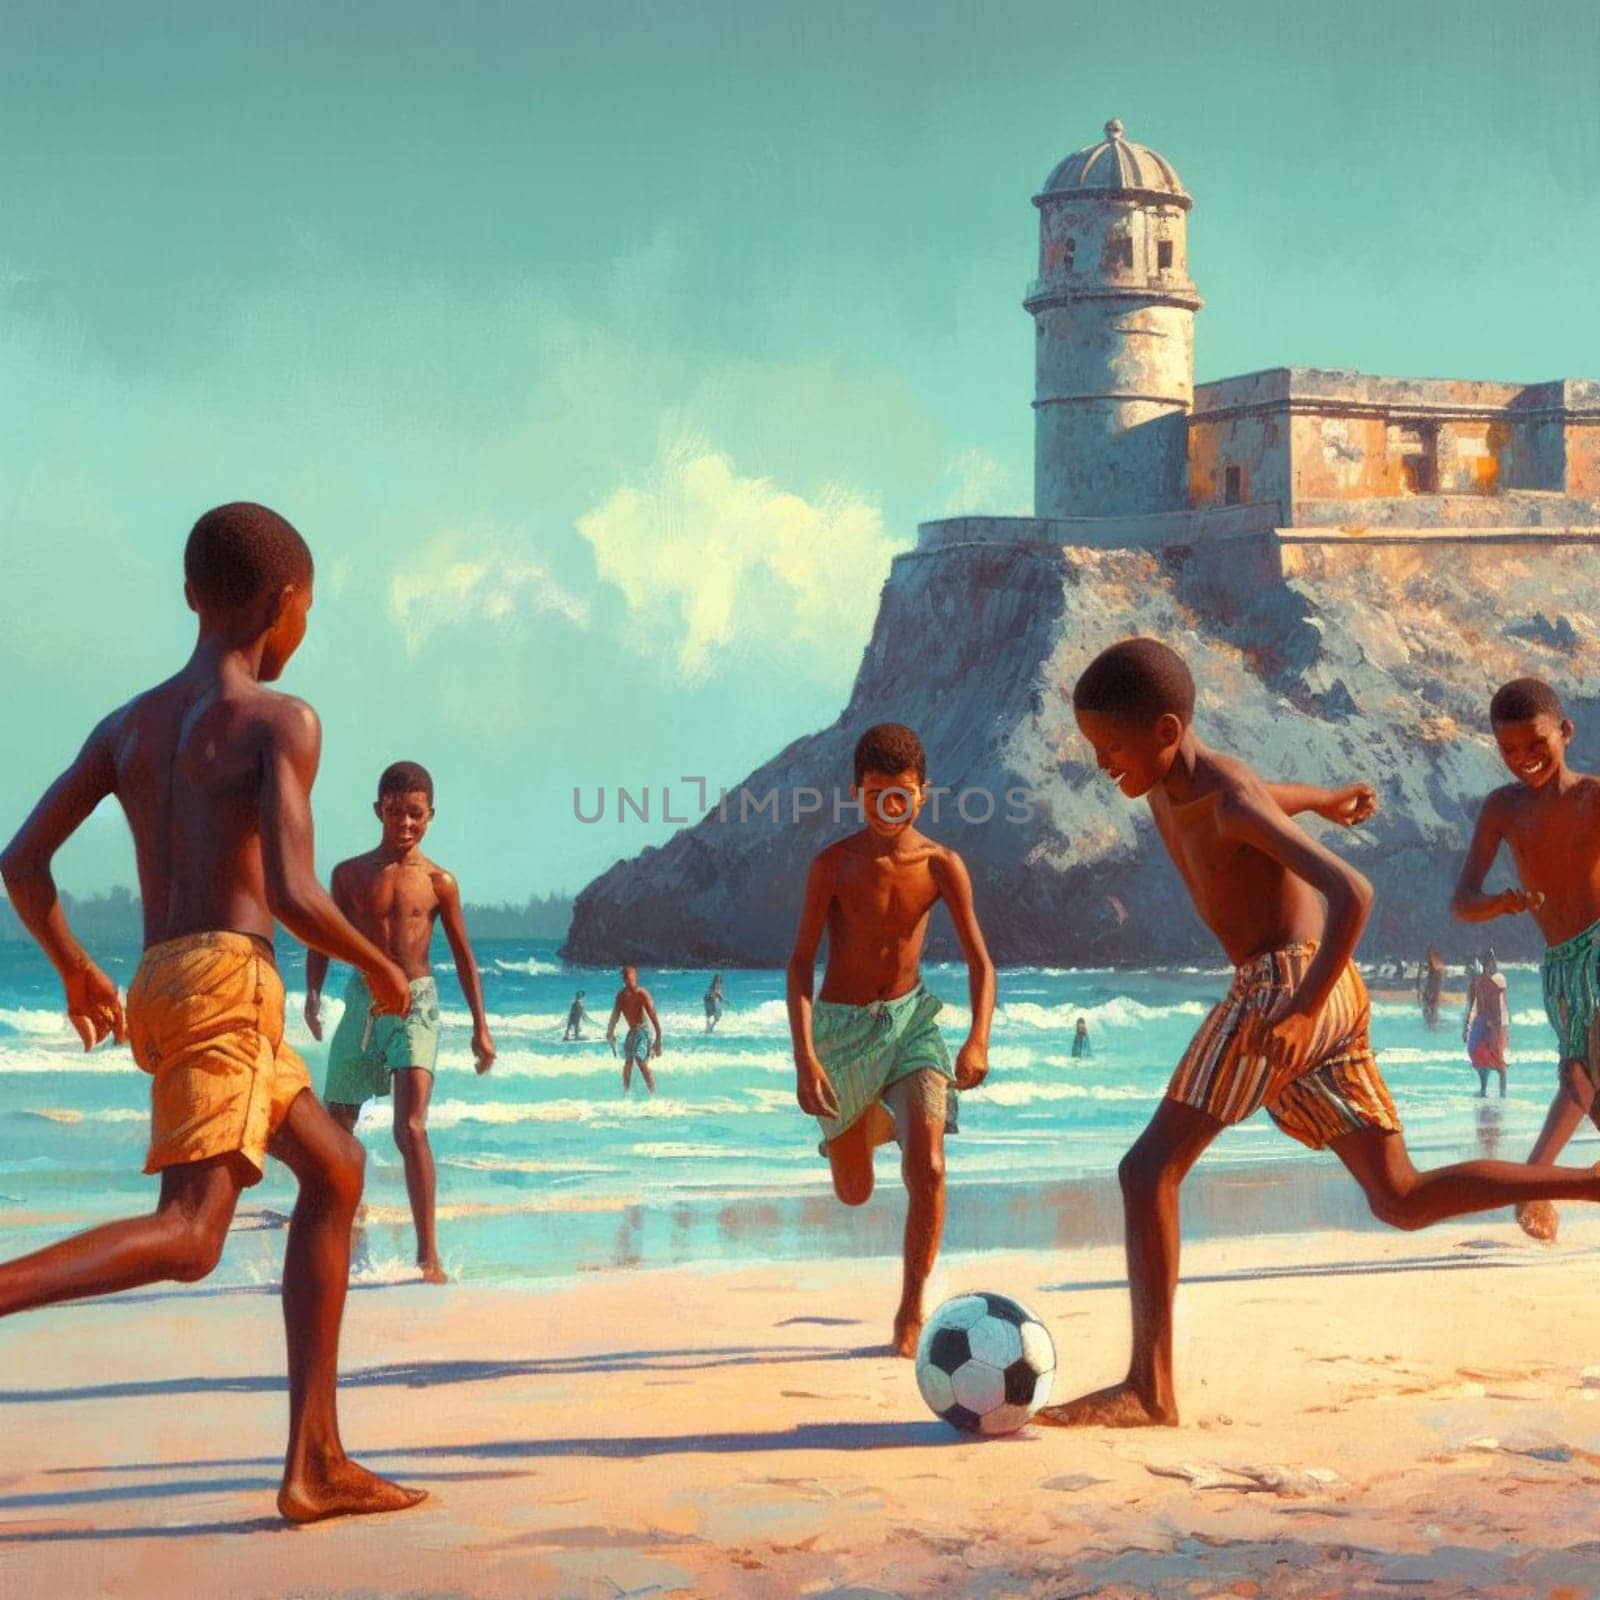 boys playing soccer and having fun in the beach illustration art by verbano